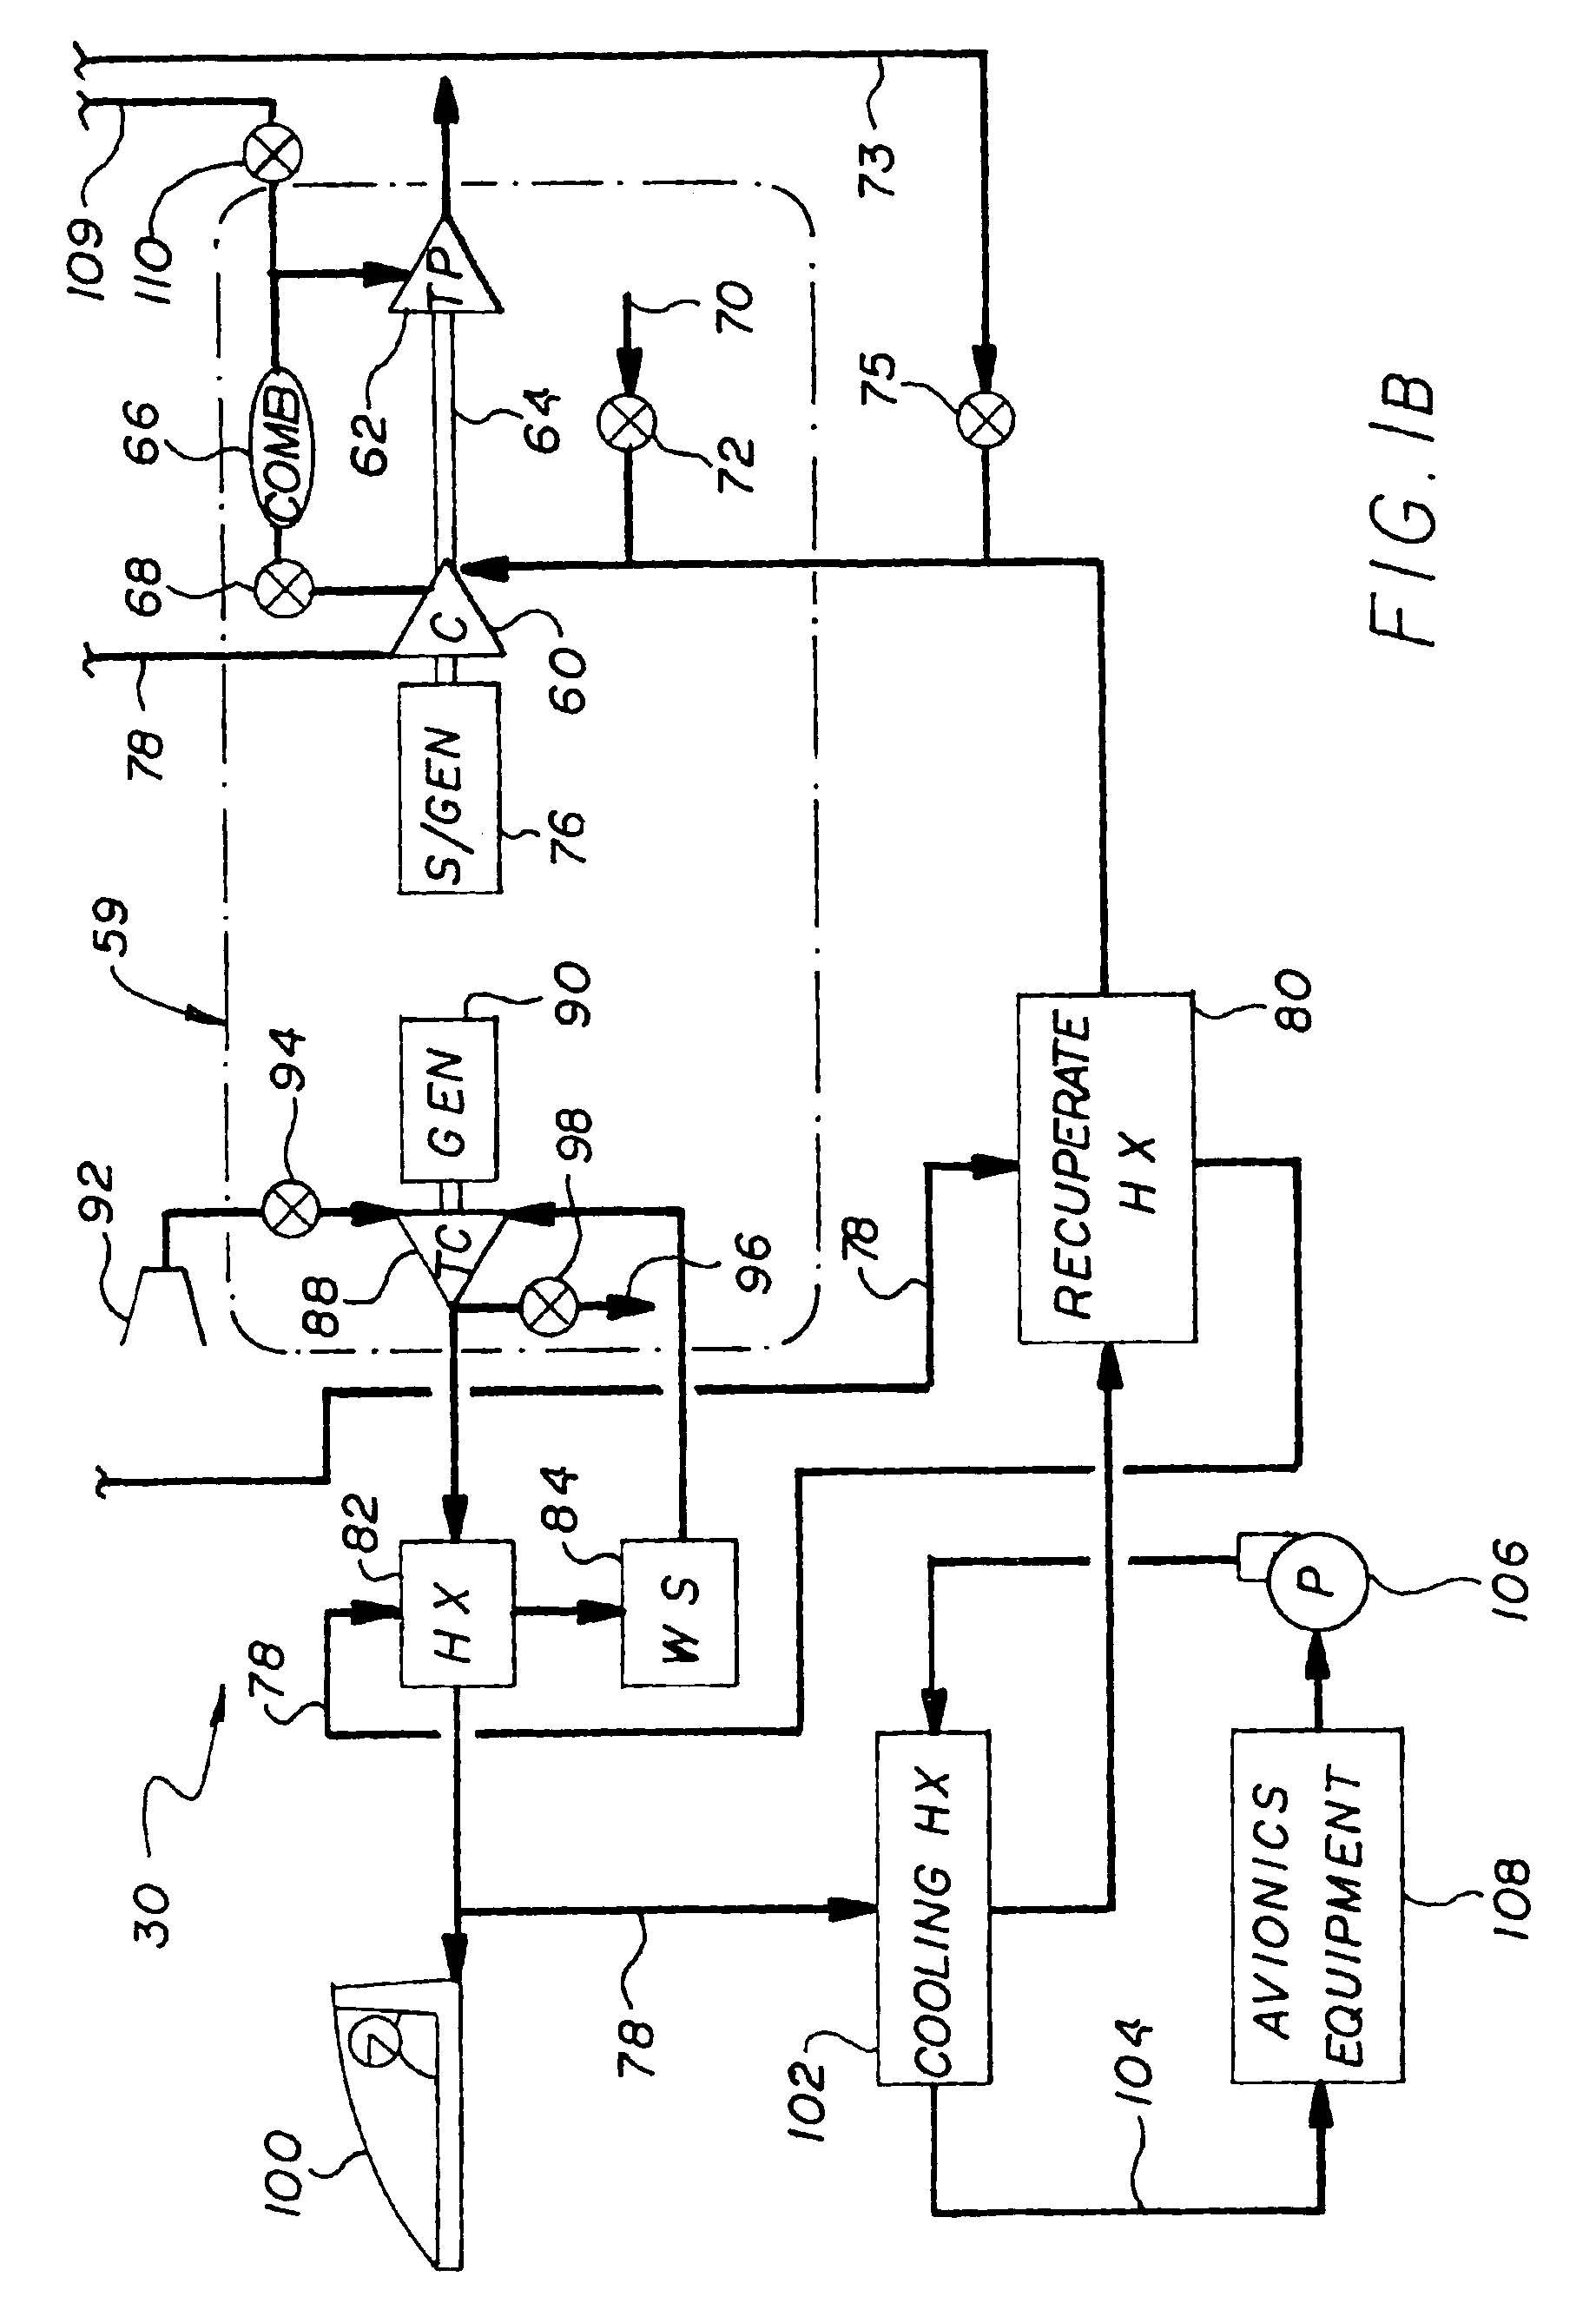 Environmental control system for an aircraft